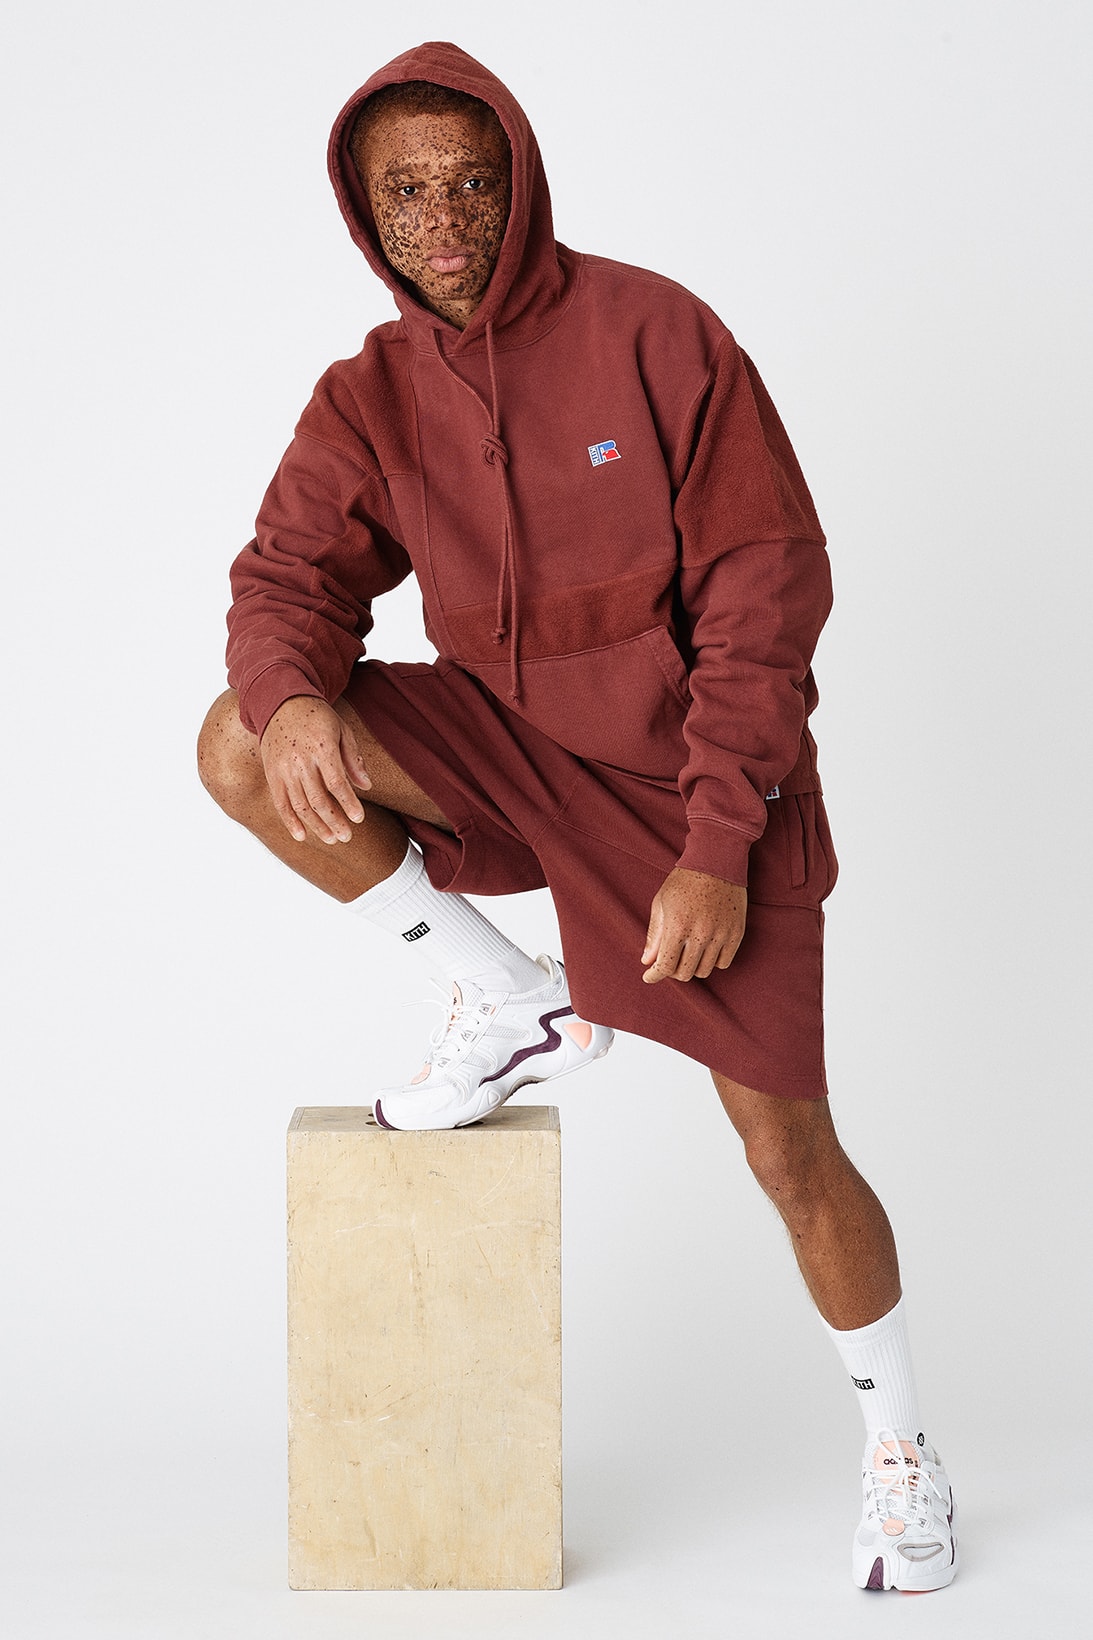 Kith x Russell Athletic Is the Ronnie Fieg's Coziest Collaboration Yet